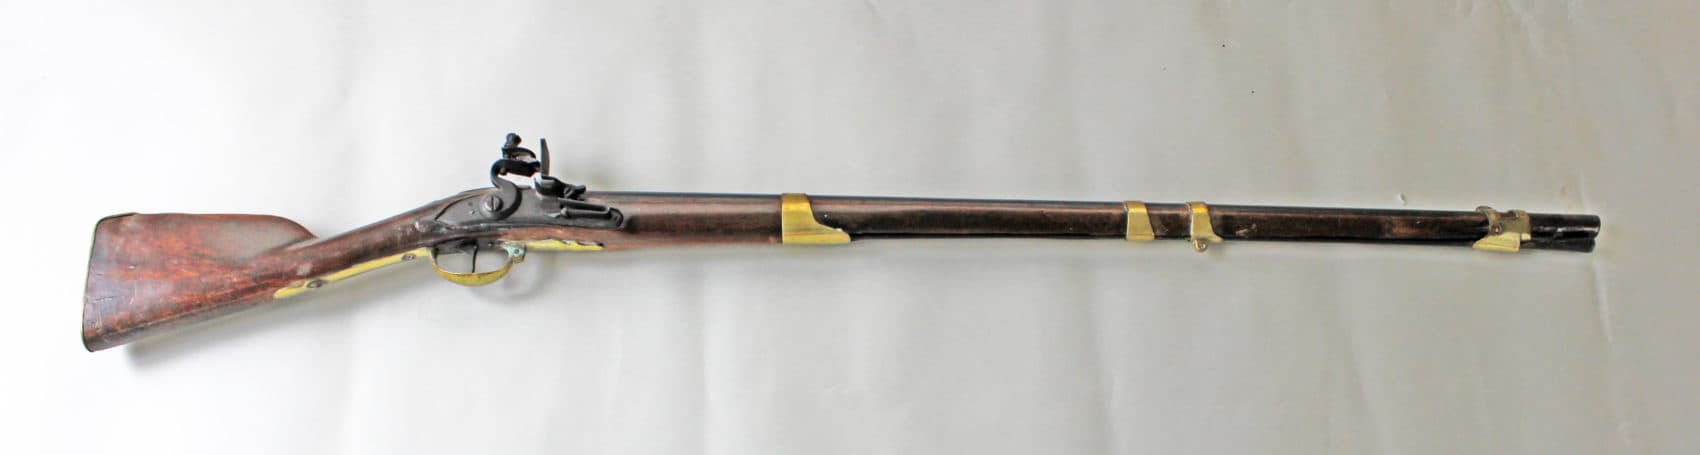 American colonist Private John Simpson is believed to have used this musket to fire the first shot in the Battle of Bunker Hill in 1775. (Courtesy Jonathan Holstein)